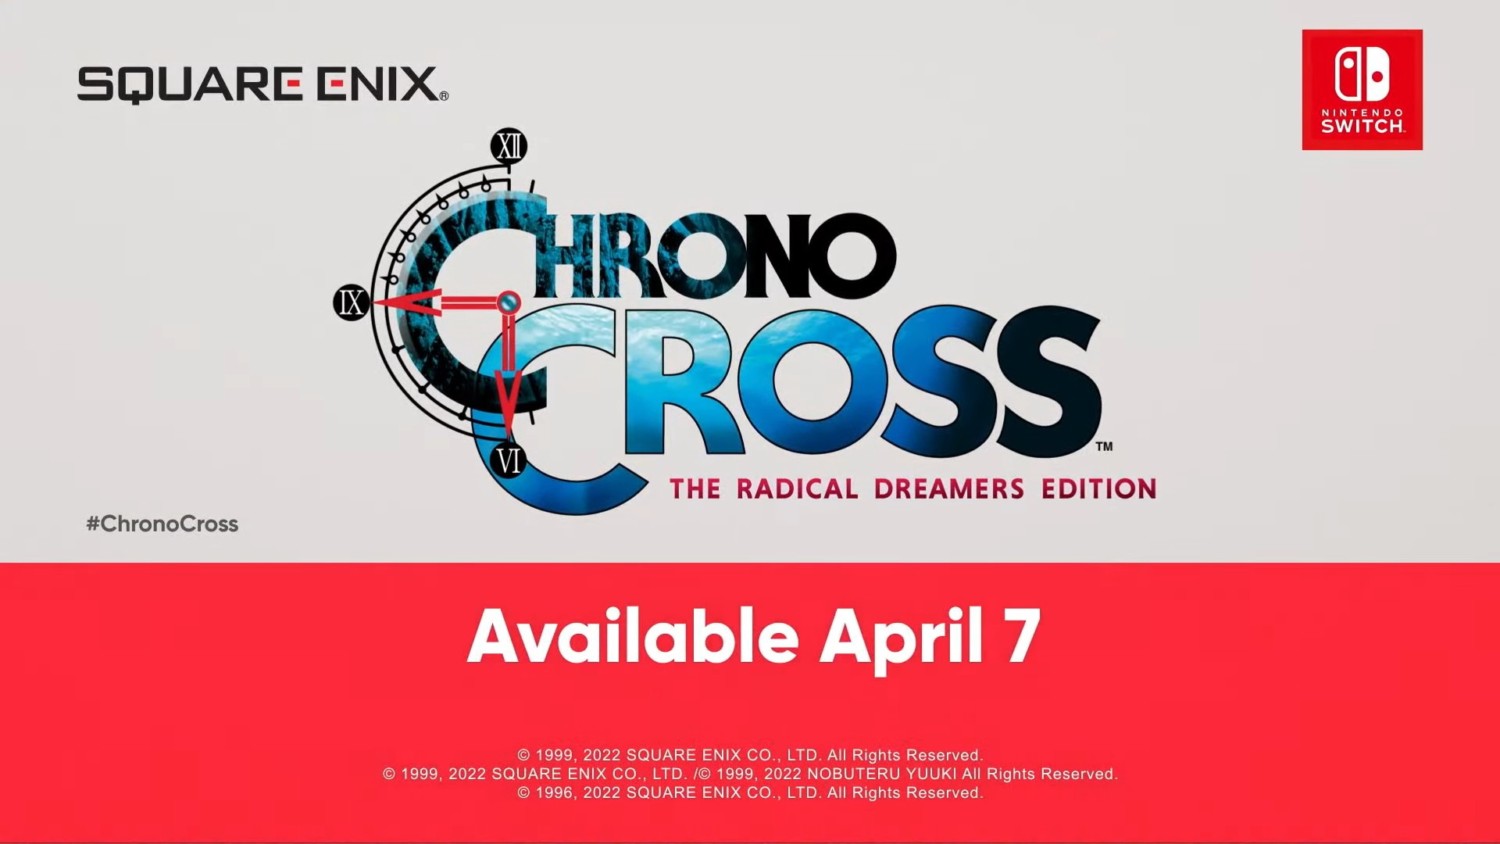 Chrono Cross [The Radical Dreamers Edition] (English) for Nintendo Switch